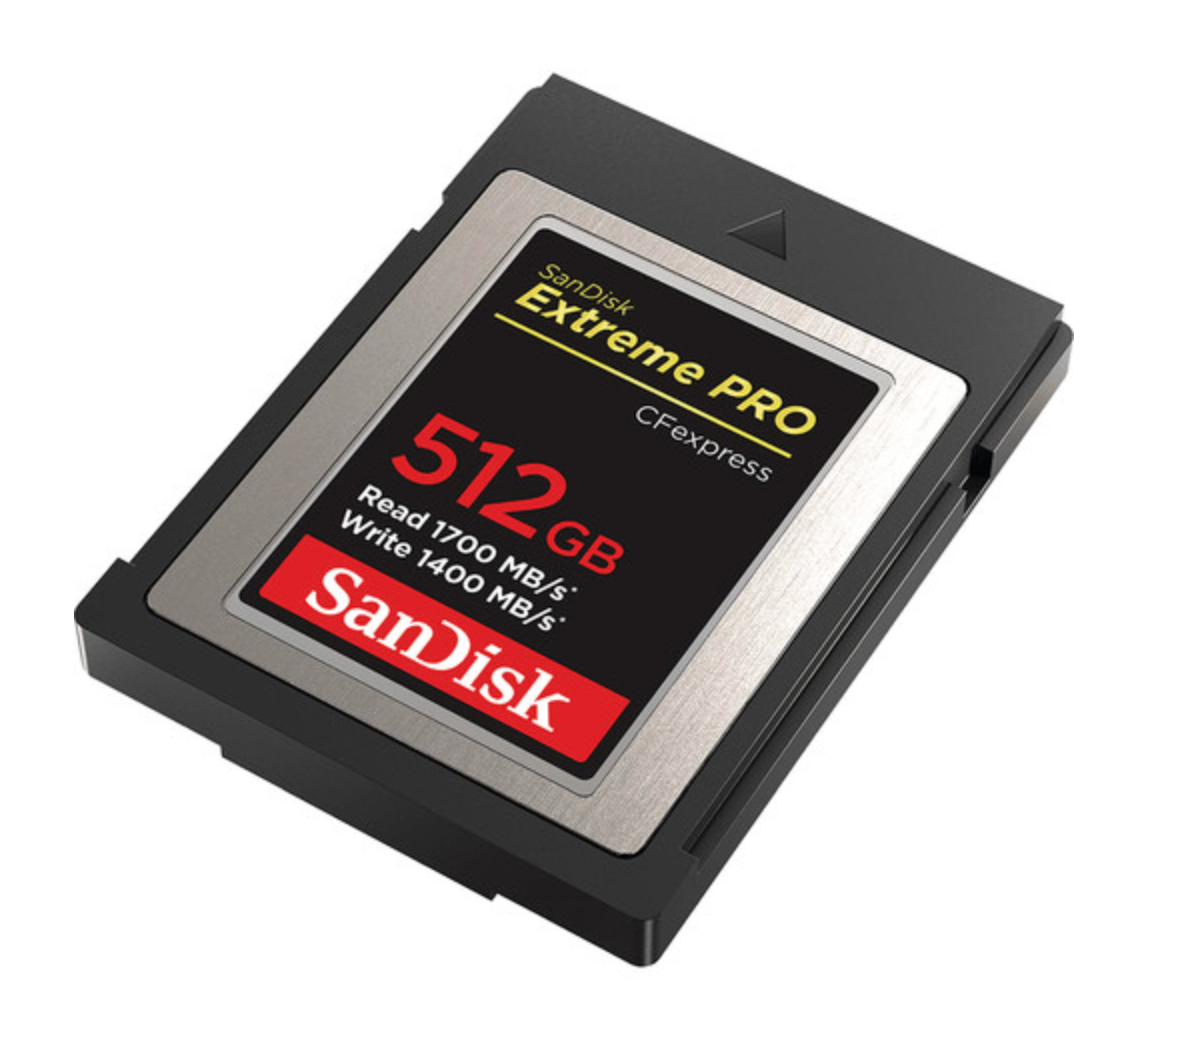 SanDisk Extreme Pro CFExpress Card Type B 512GB